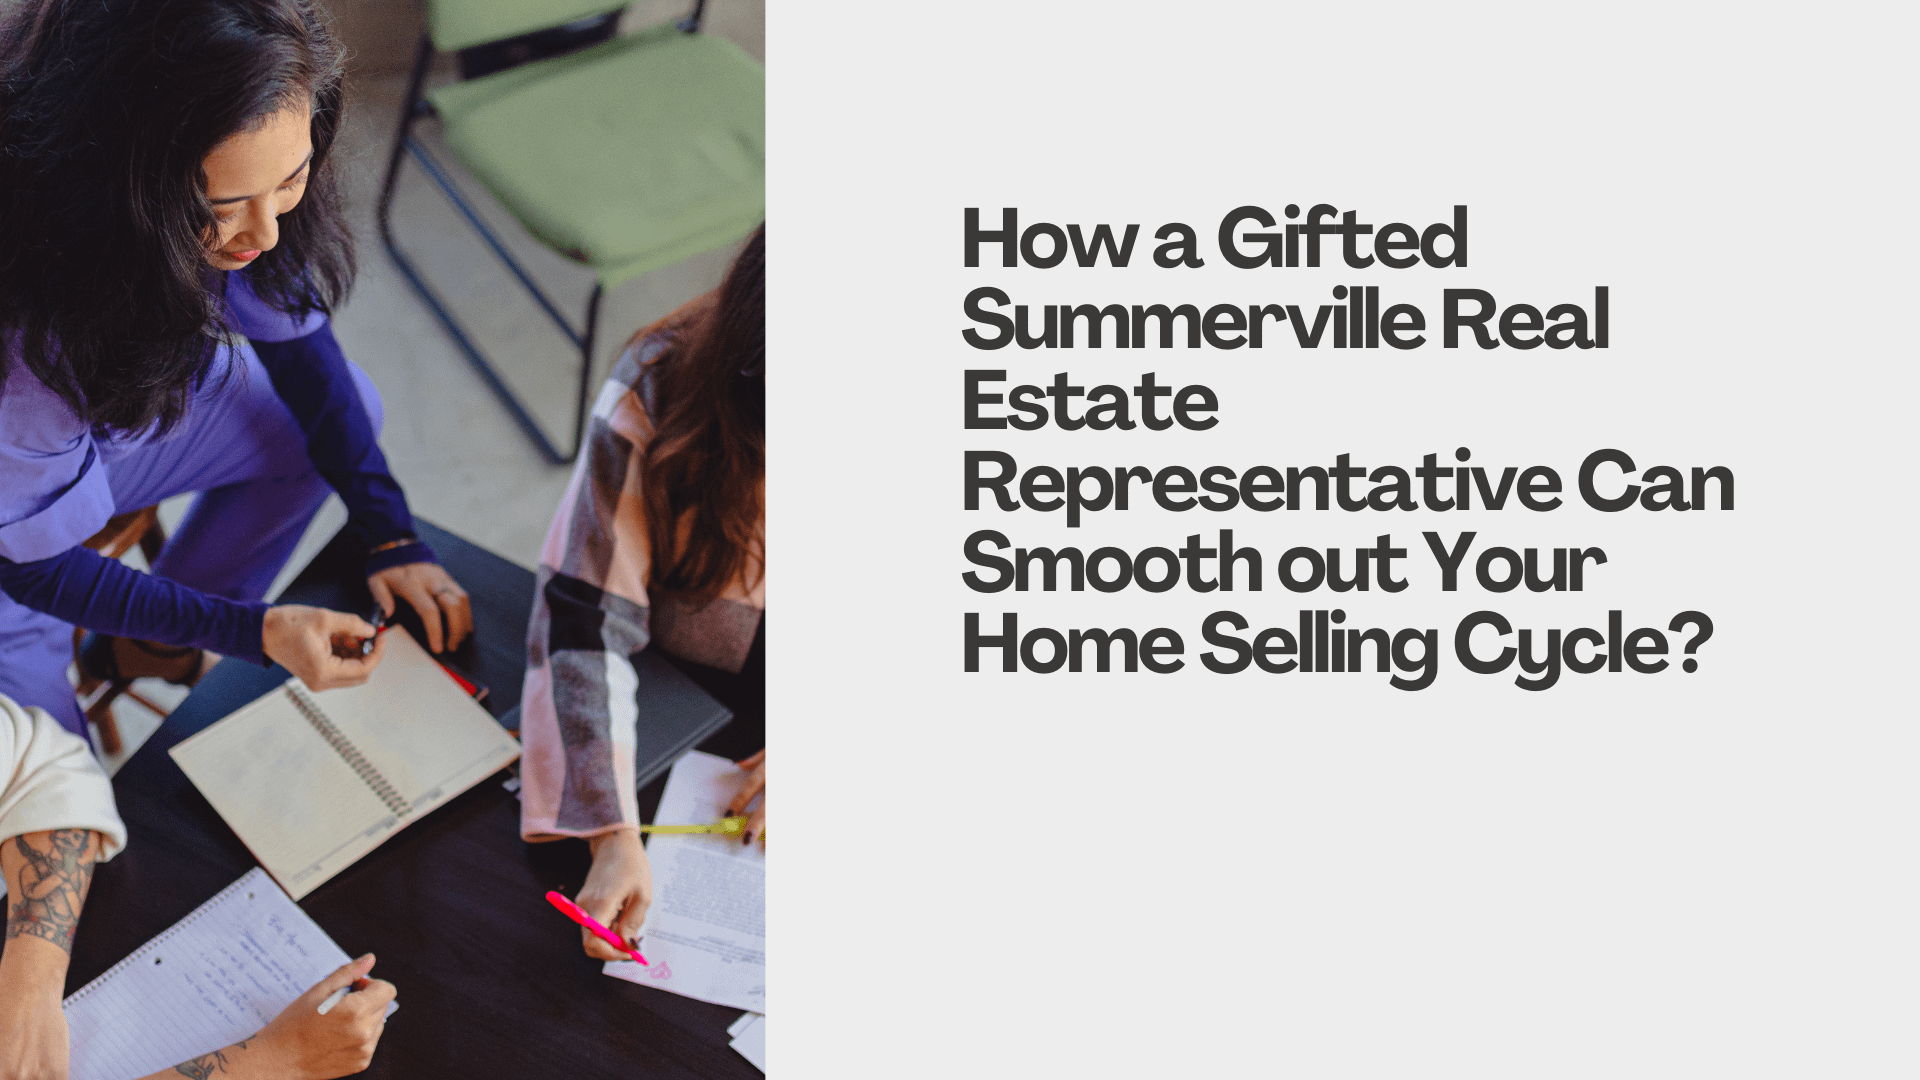 How a Gifted Summerville Real Estate Representative Can Smooth out Your Home Selling Cycle